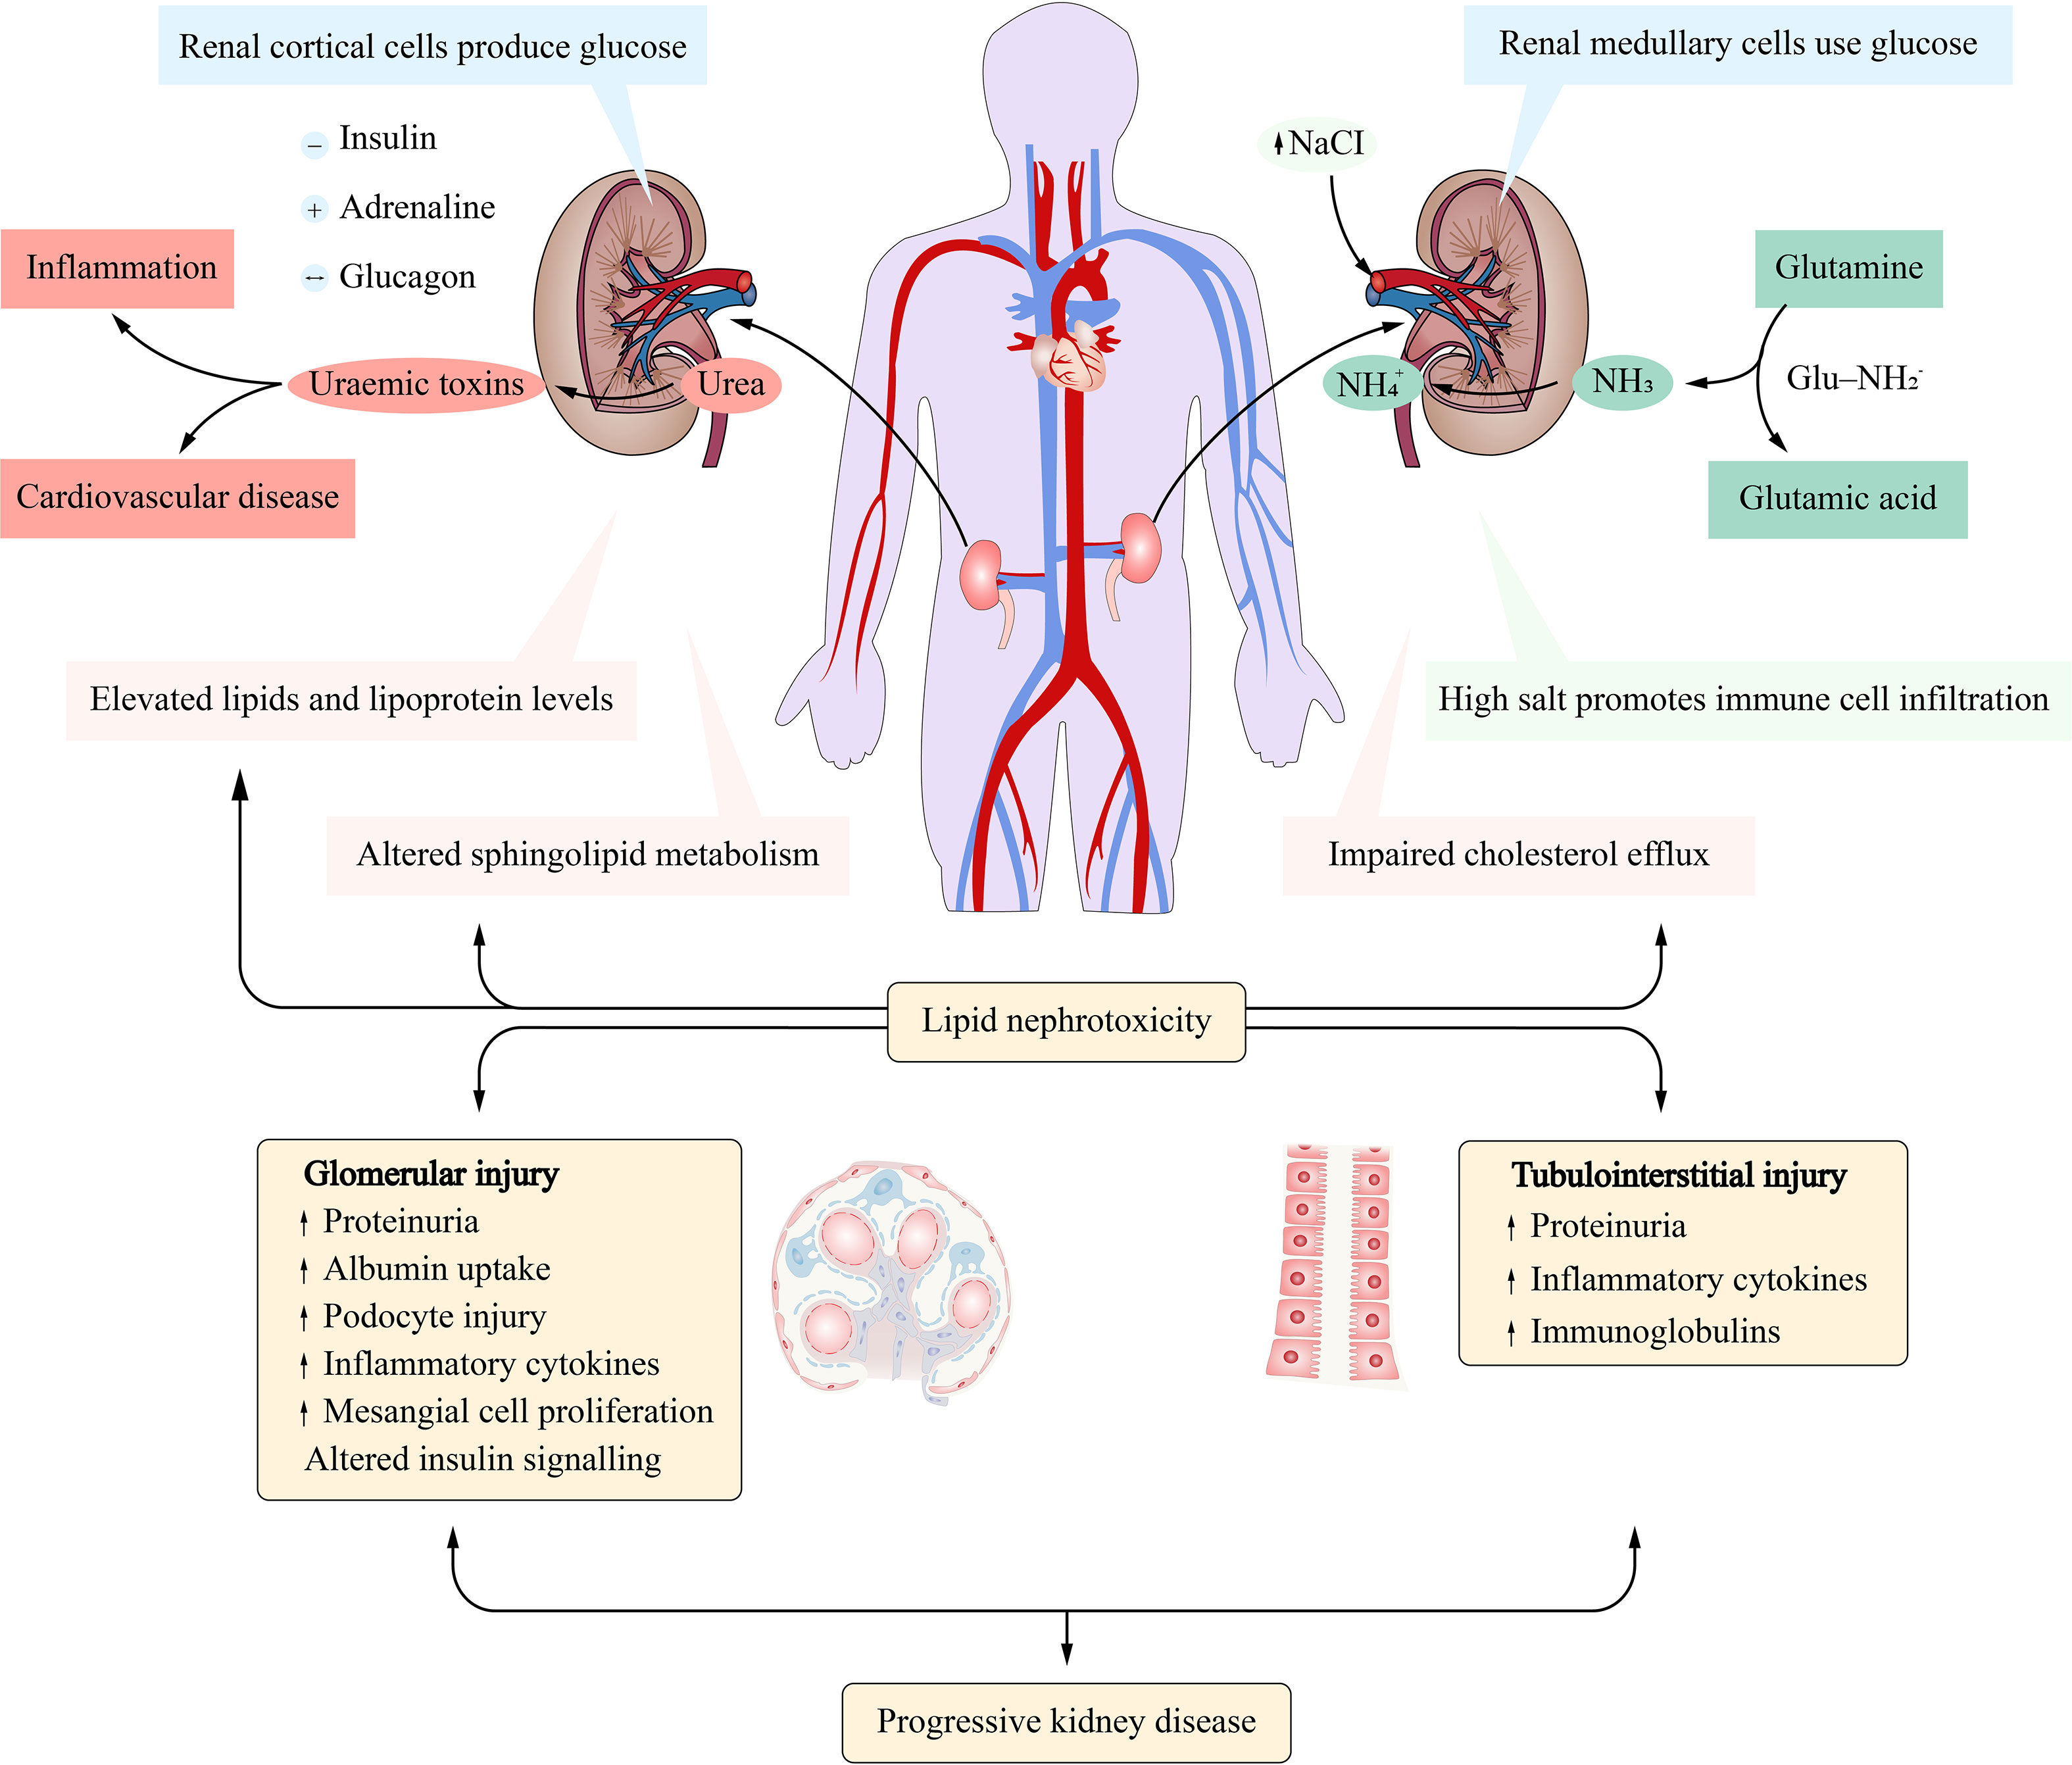 Nitric oxide signalling in kidney regulation and cardiometabolic health